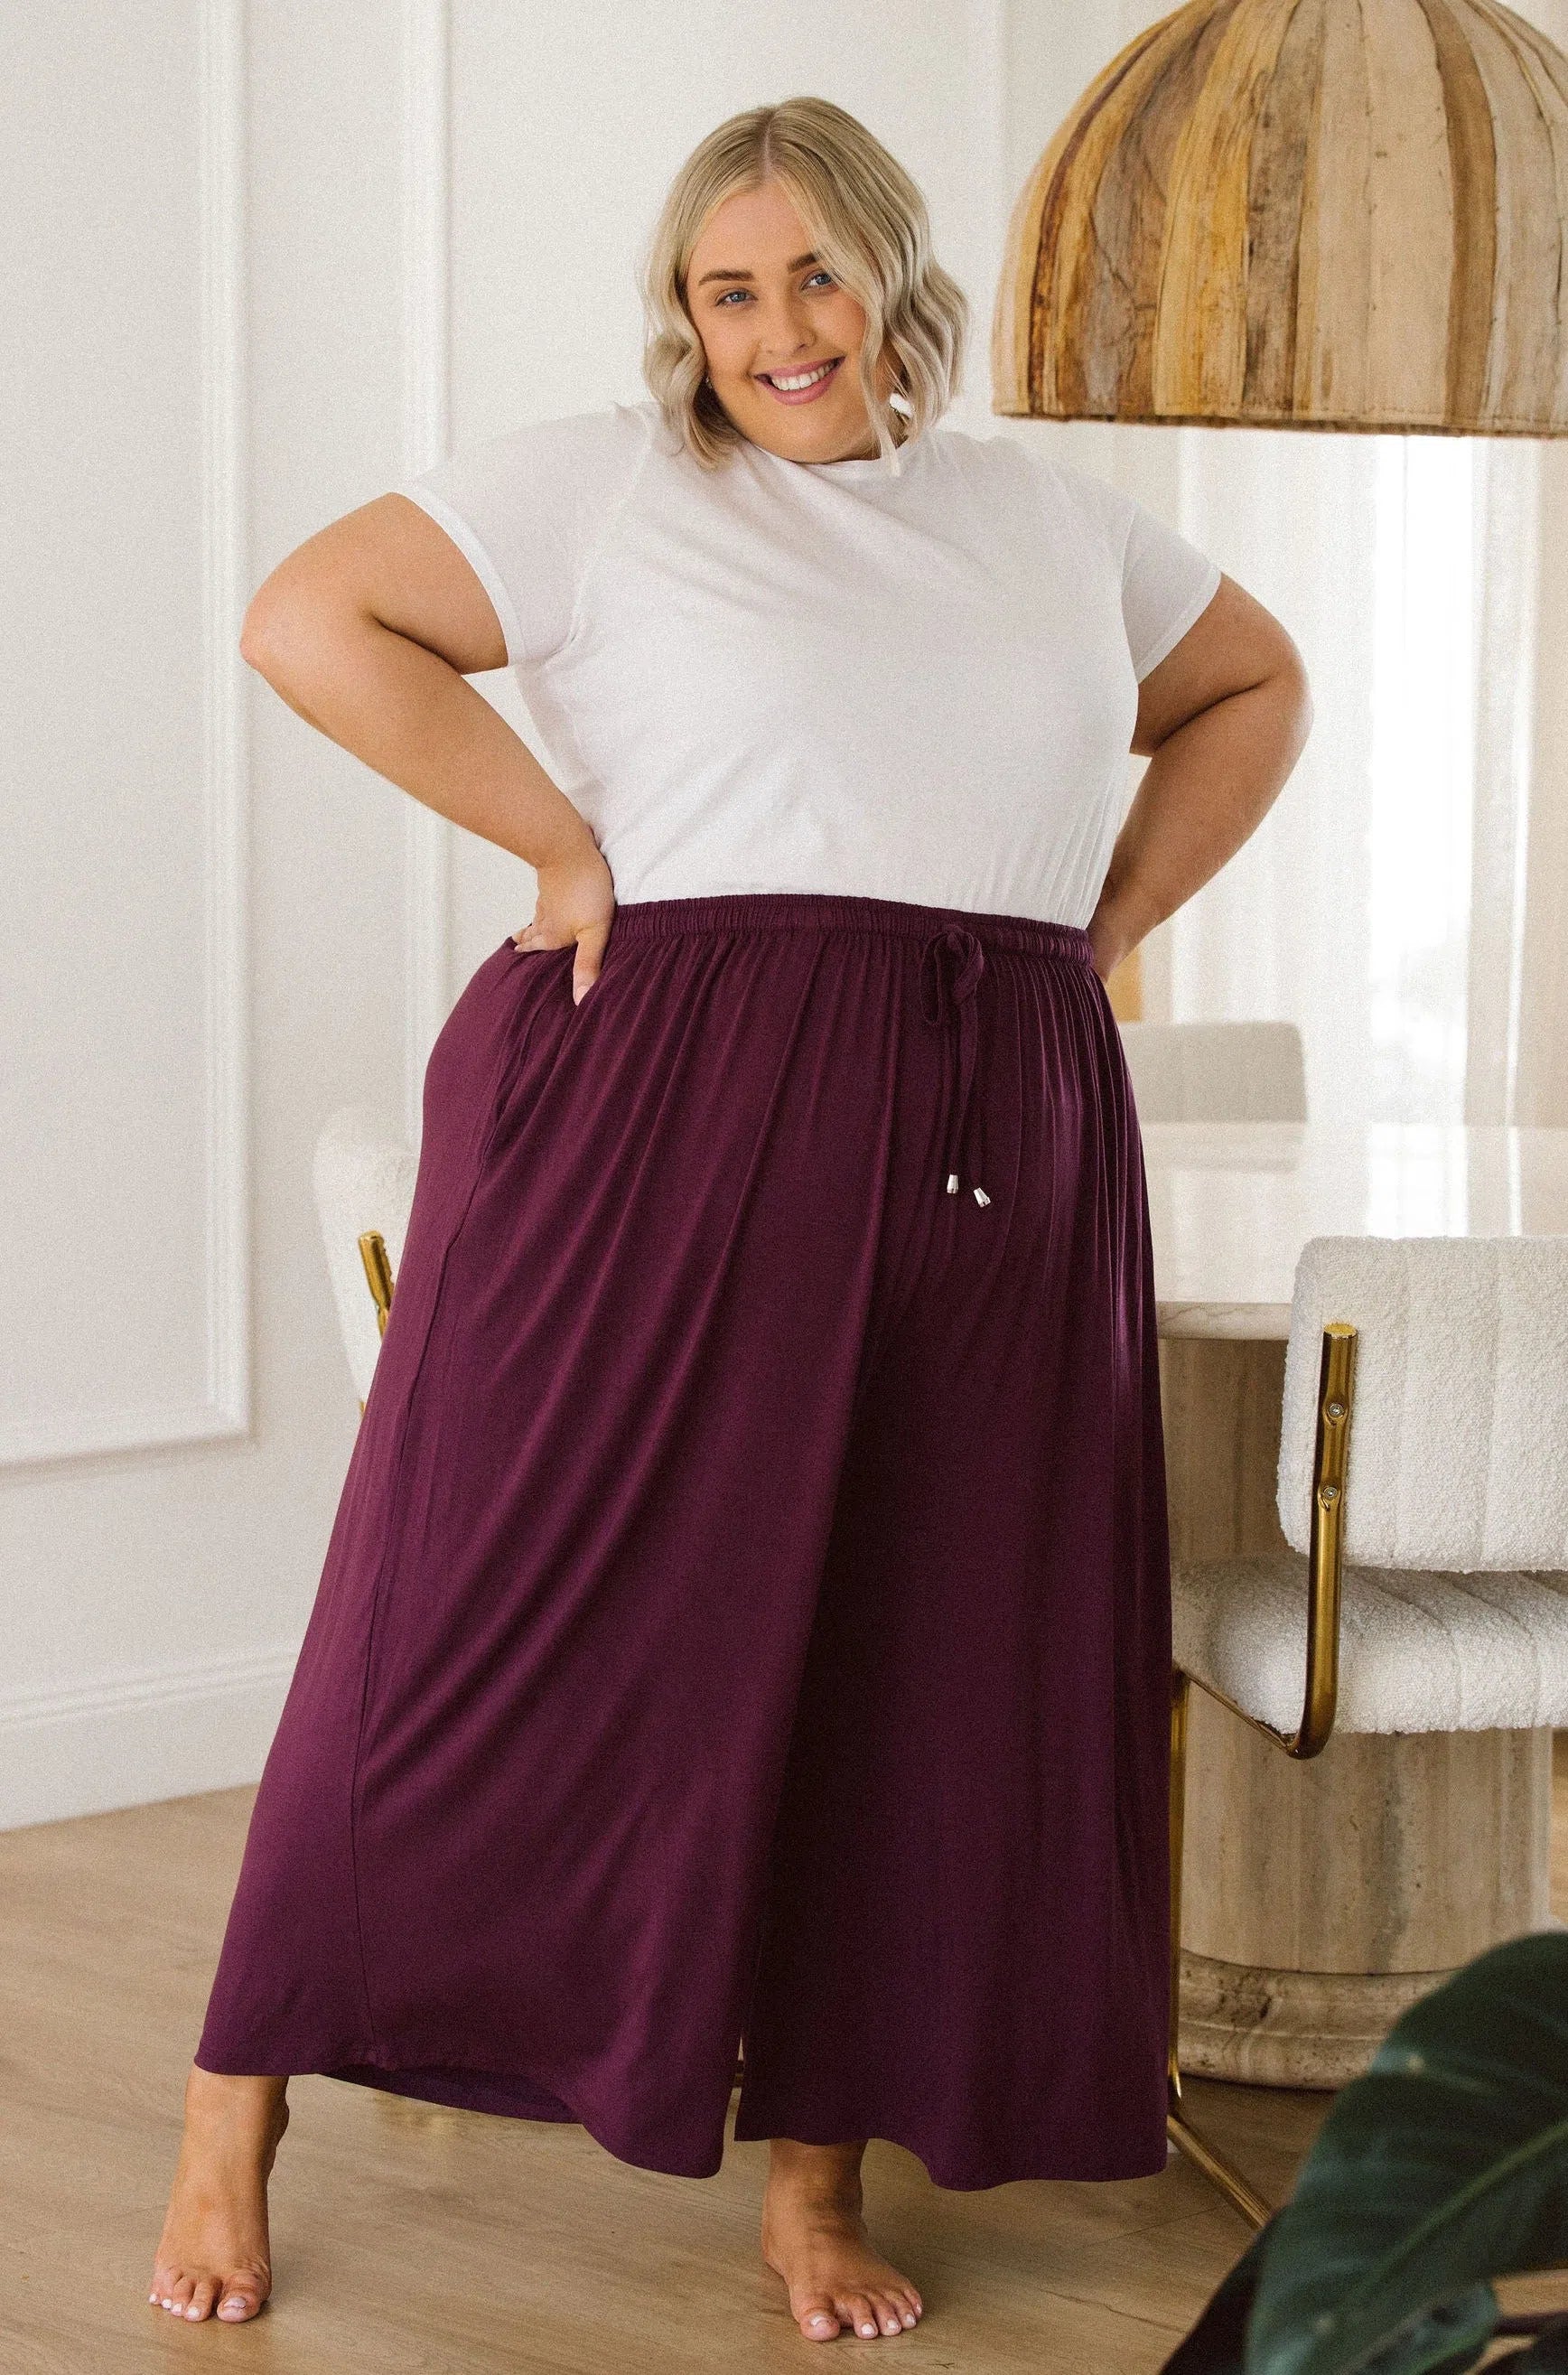 Women's Plus Size Pants - Elevate Your Style with Darcy Pants in